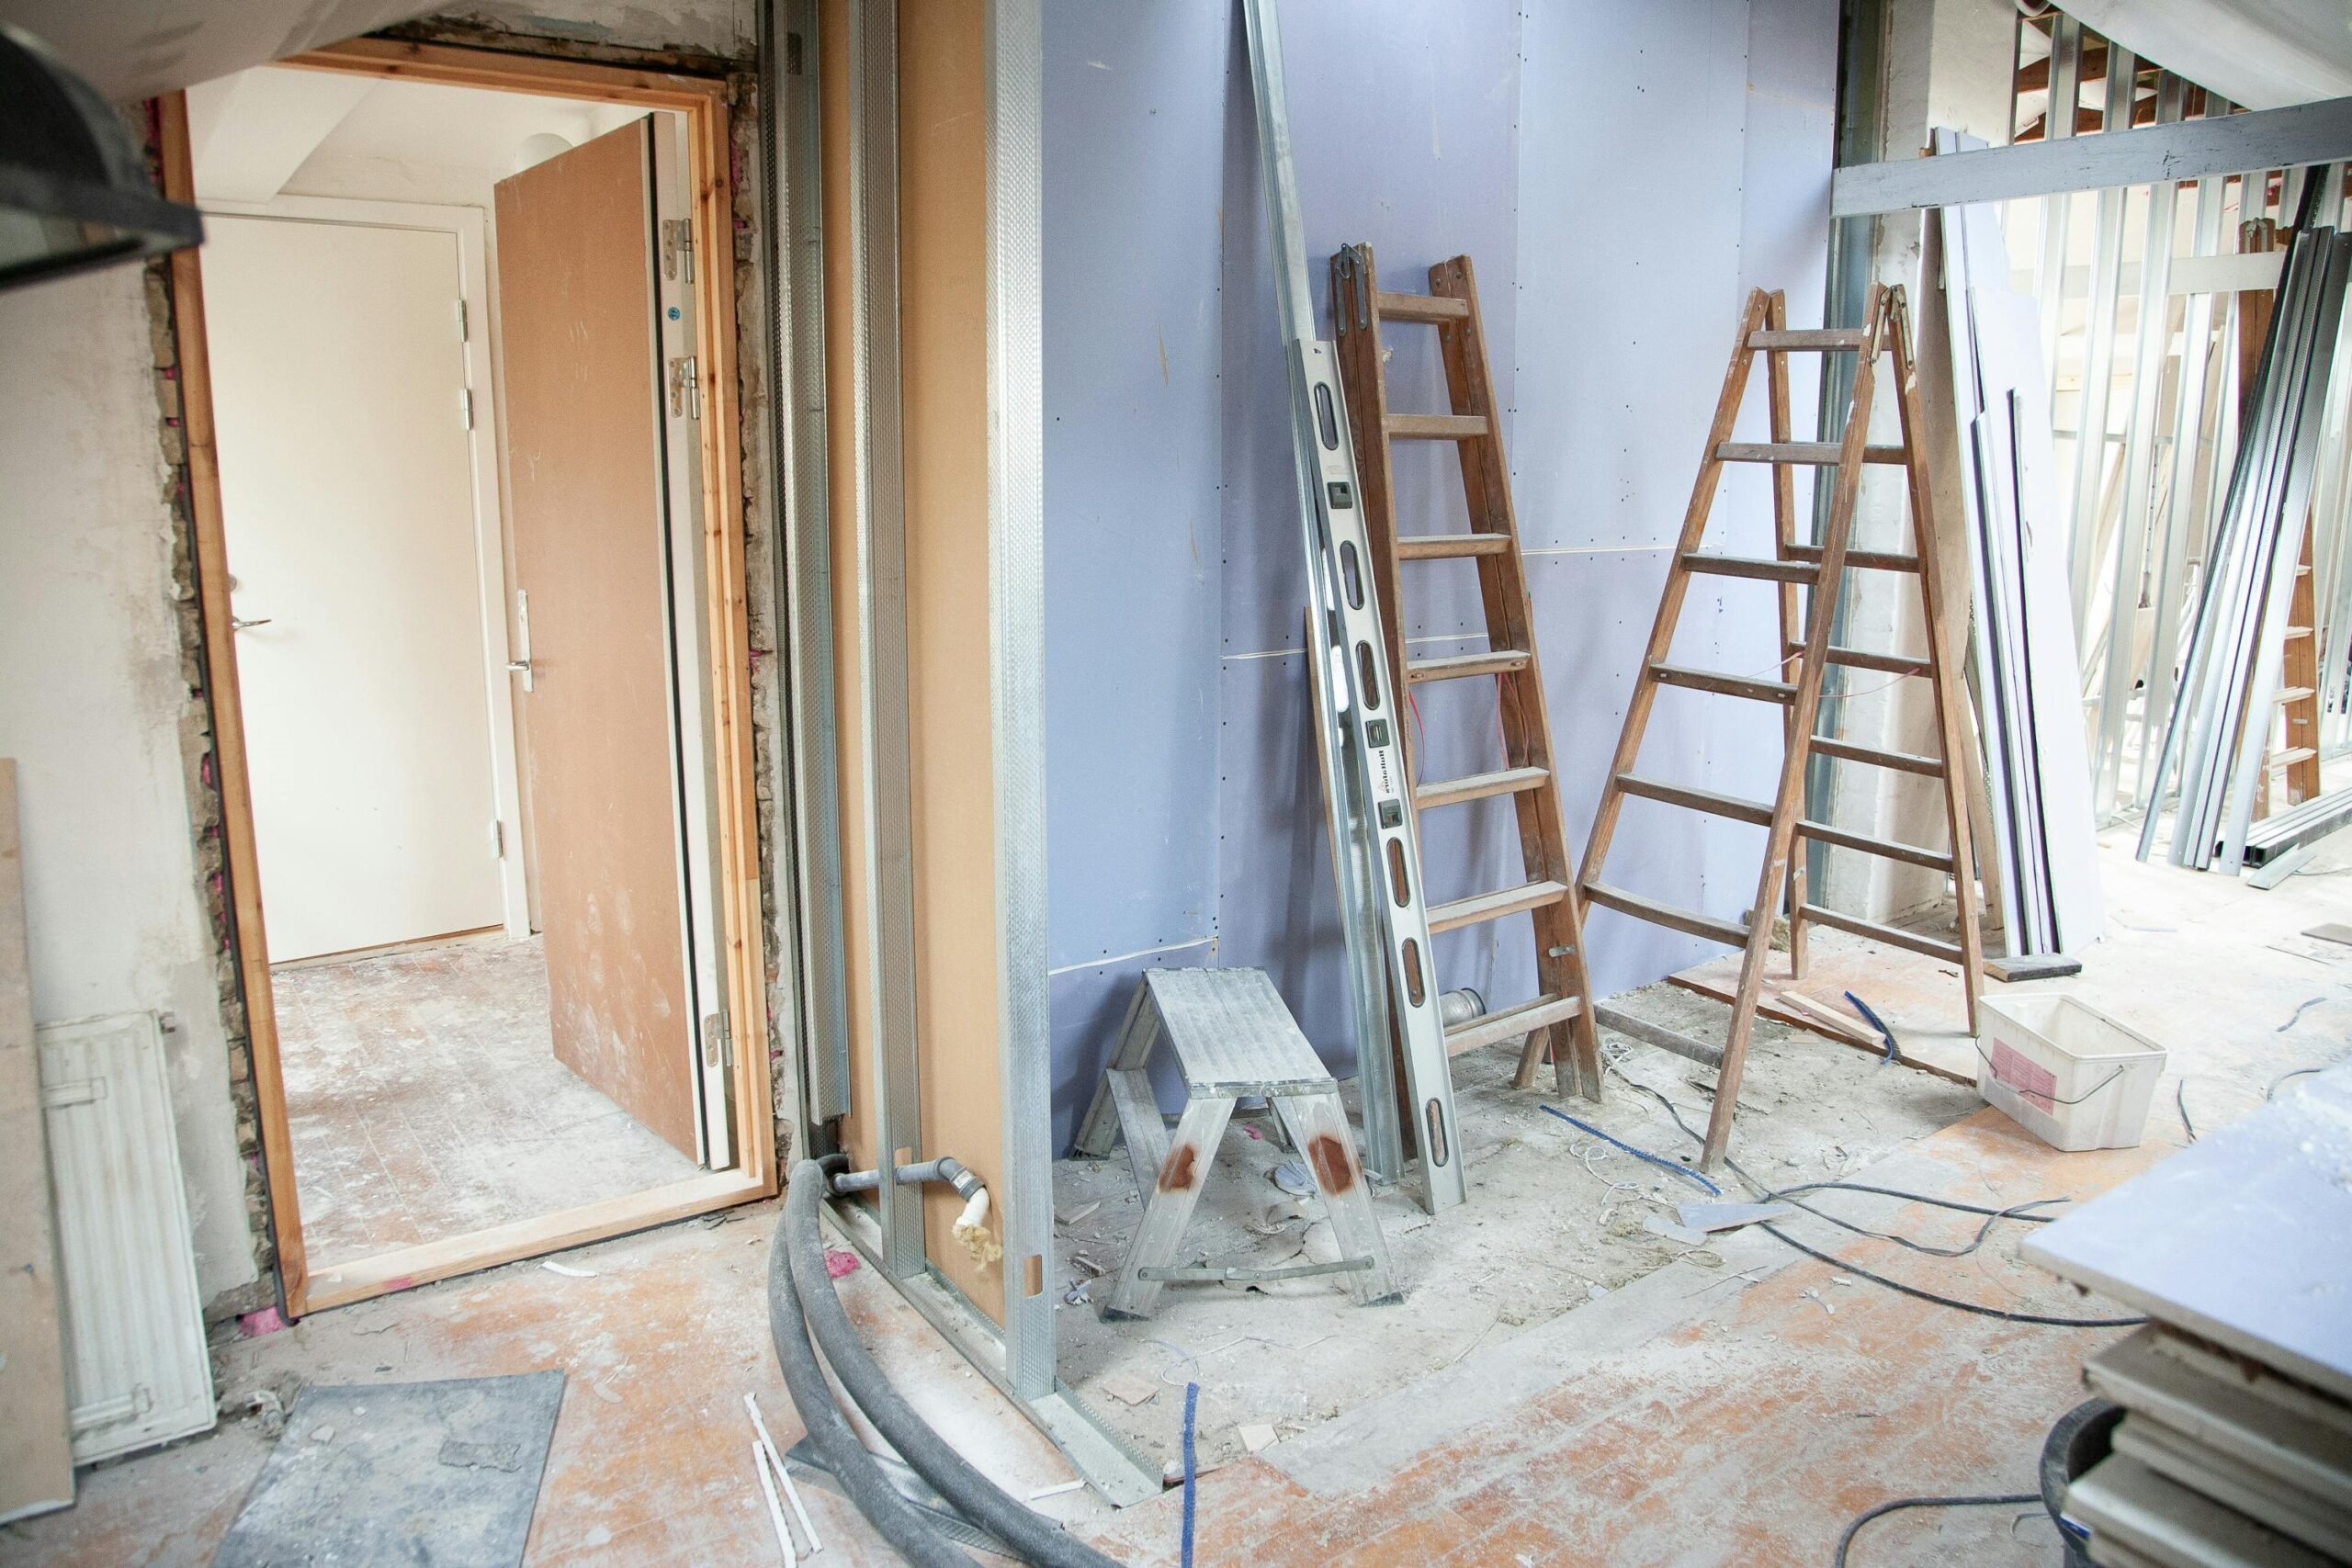 Home Remodeling Footages During the Process